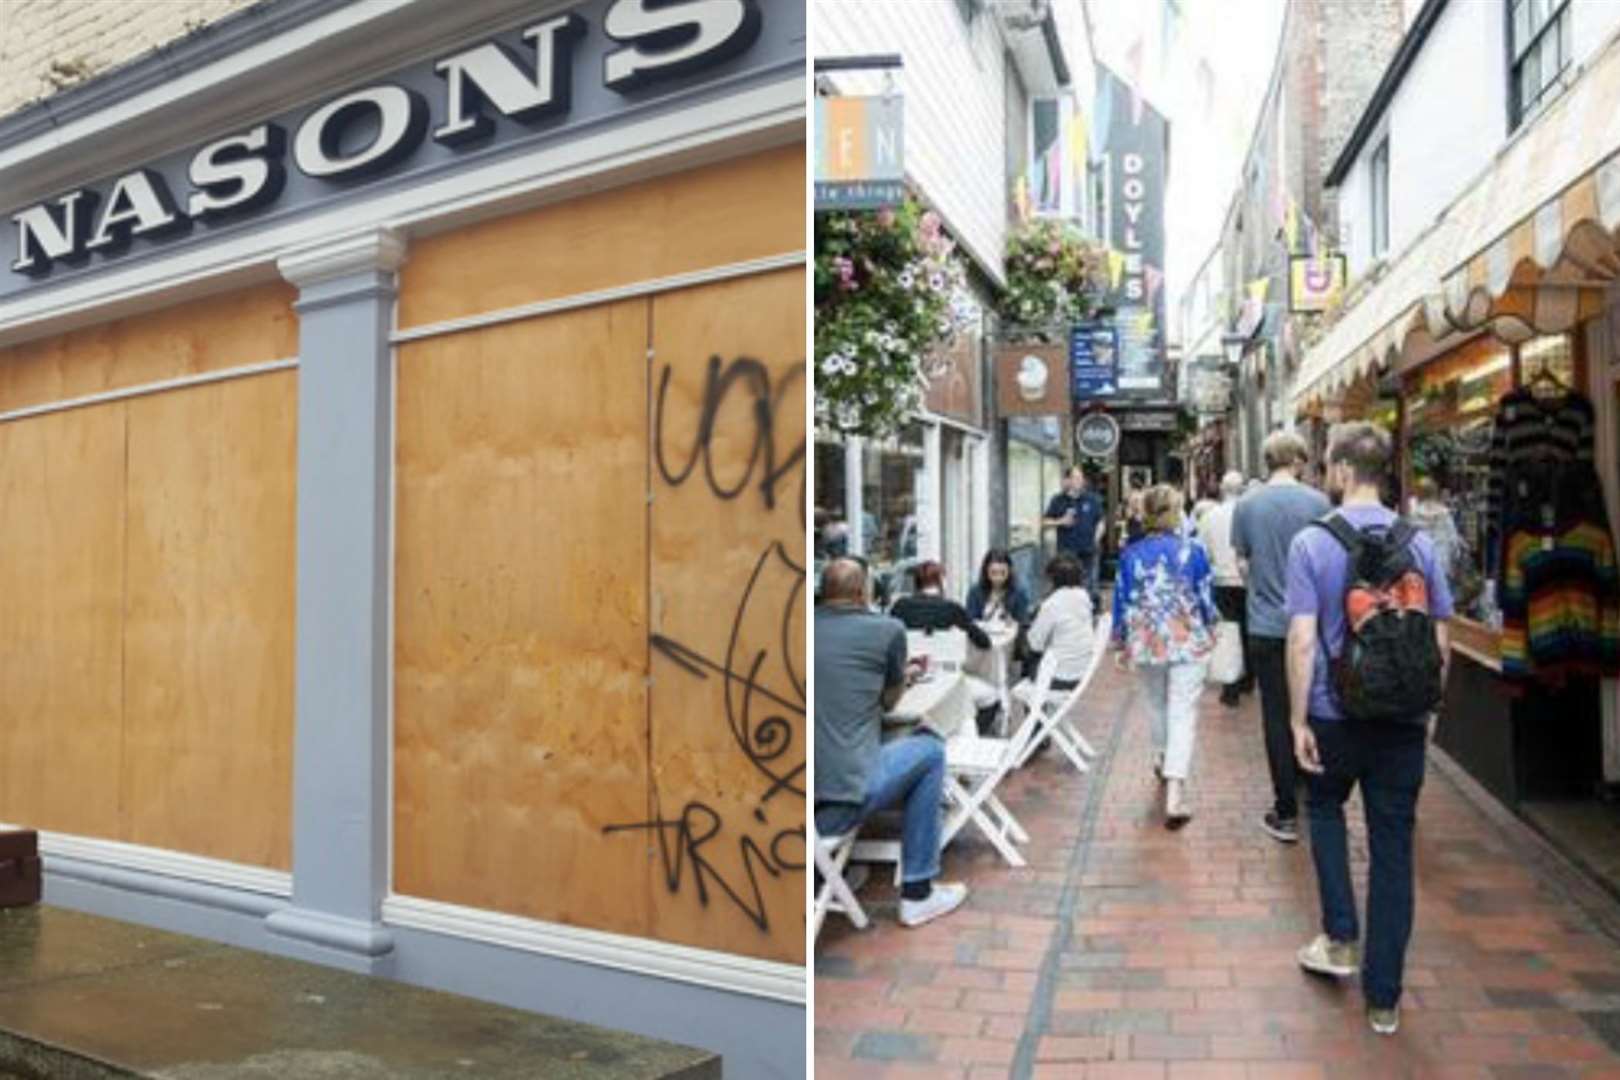 Could Nasons in Canterbury be turned into a Brighton Lanes-style shopping thoroughfare? (10513100)